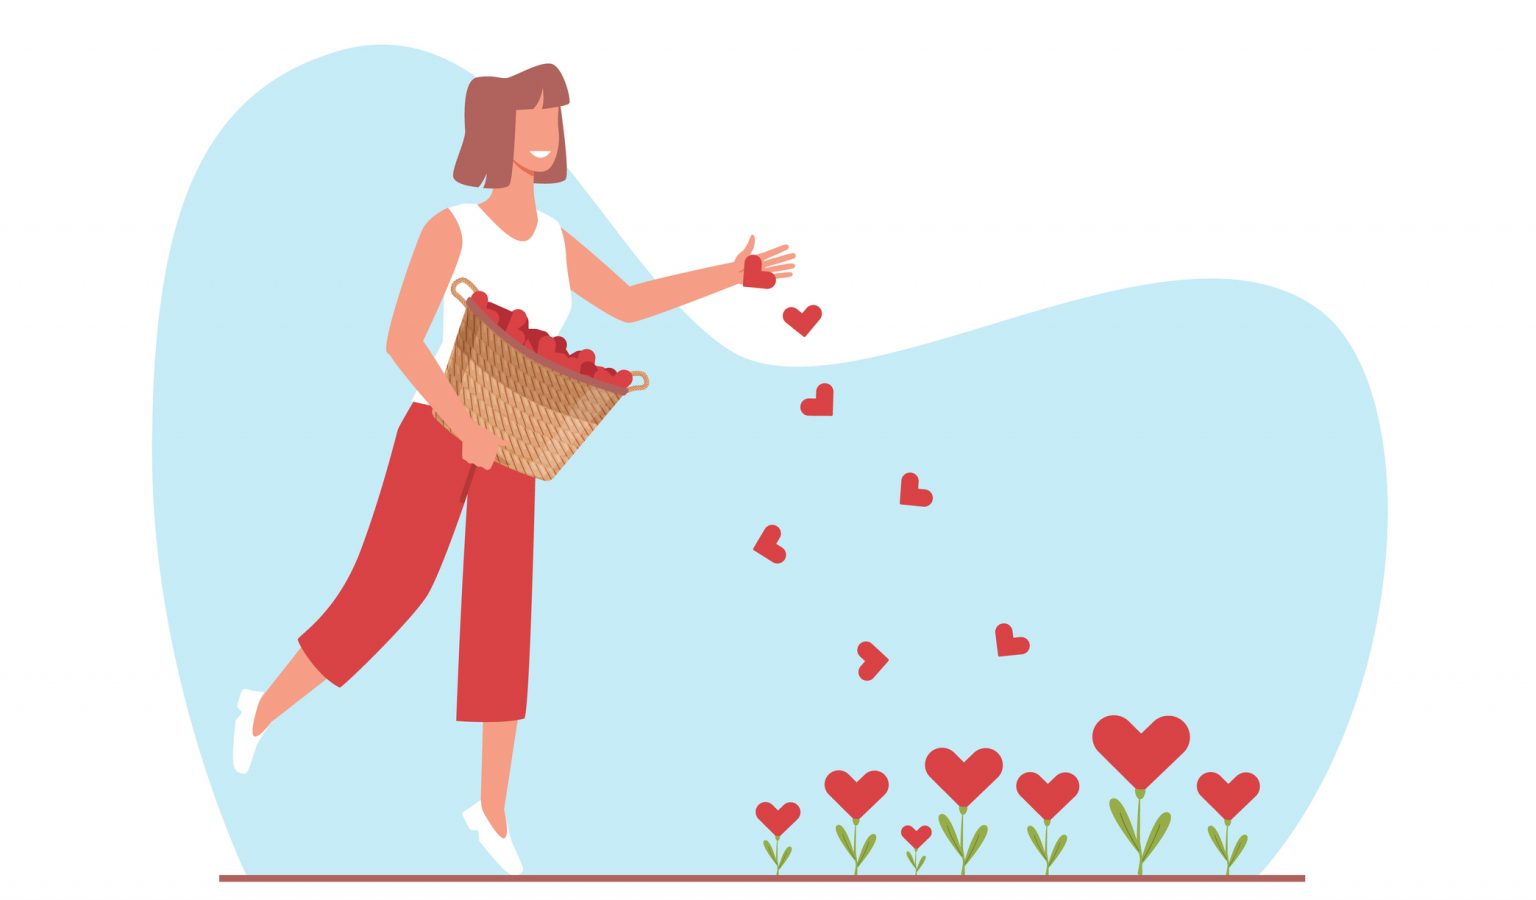 Joyful girl sows hearts as symbol of love and peace, hope and care. Adorable woman with basket. Romantic happy emotion. Red blossoms growing. Cartoon flat style isolated illustration. Vector concept